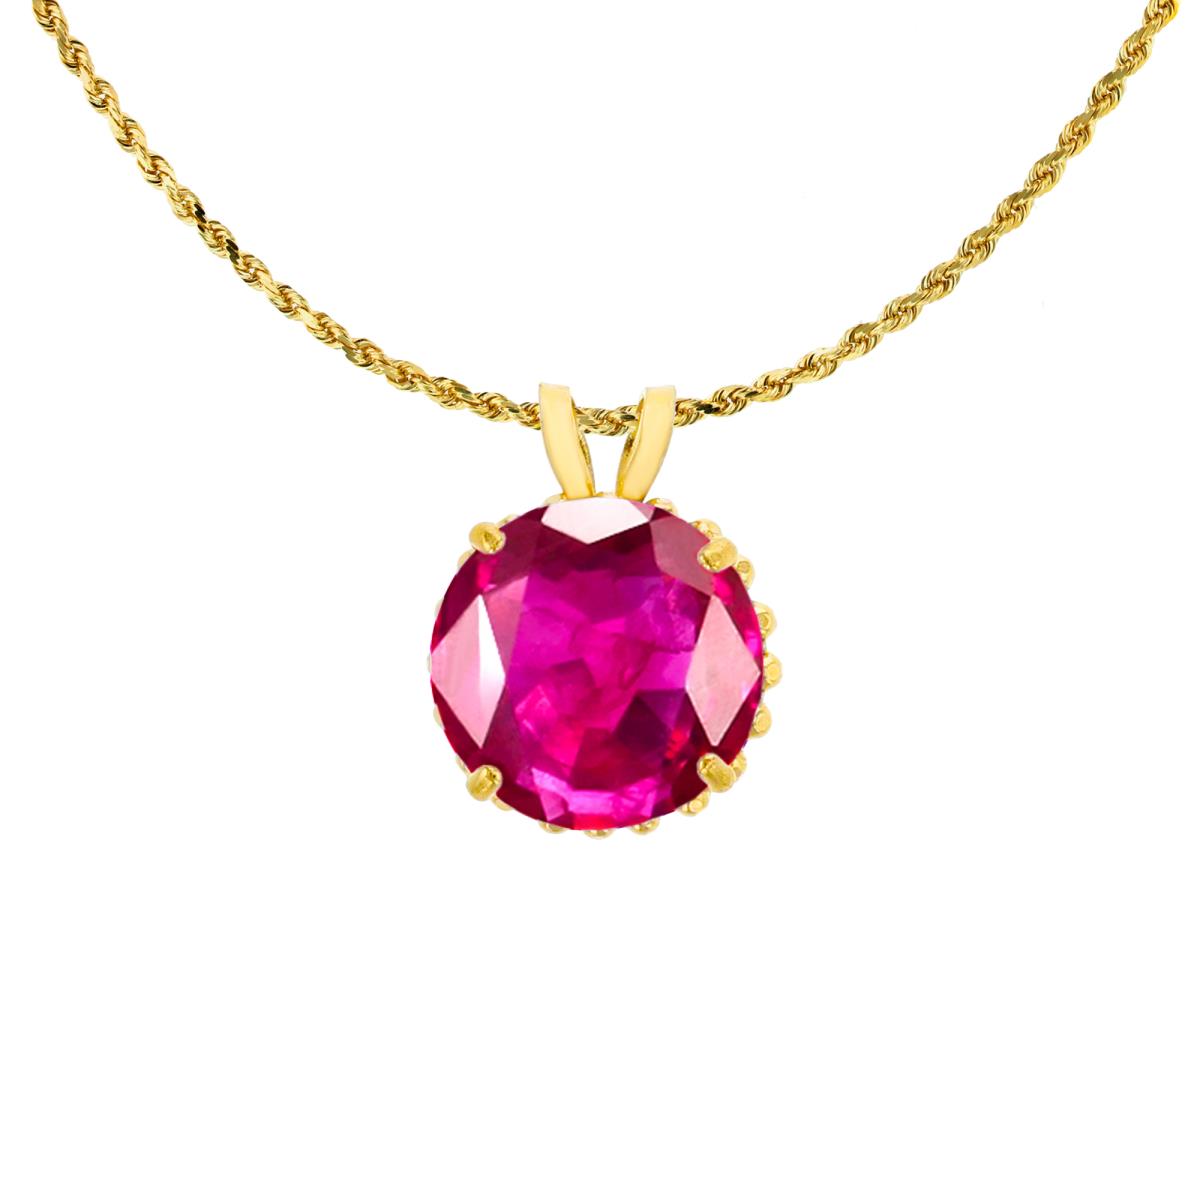 14K Yellow Gold 7mm Rd Cut Glass Filled Ruby with Bead Frame Rabbit Ear 18" Rope Chain Necklace